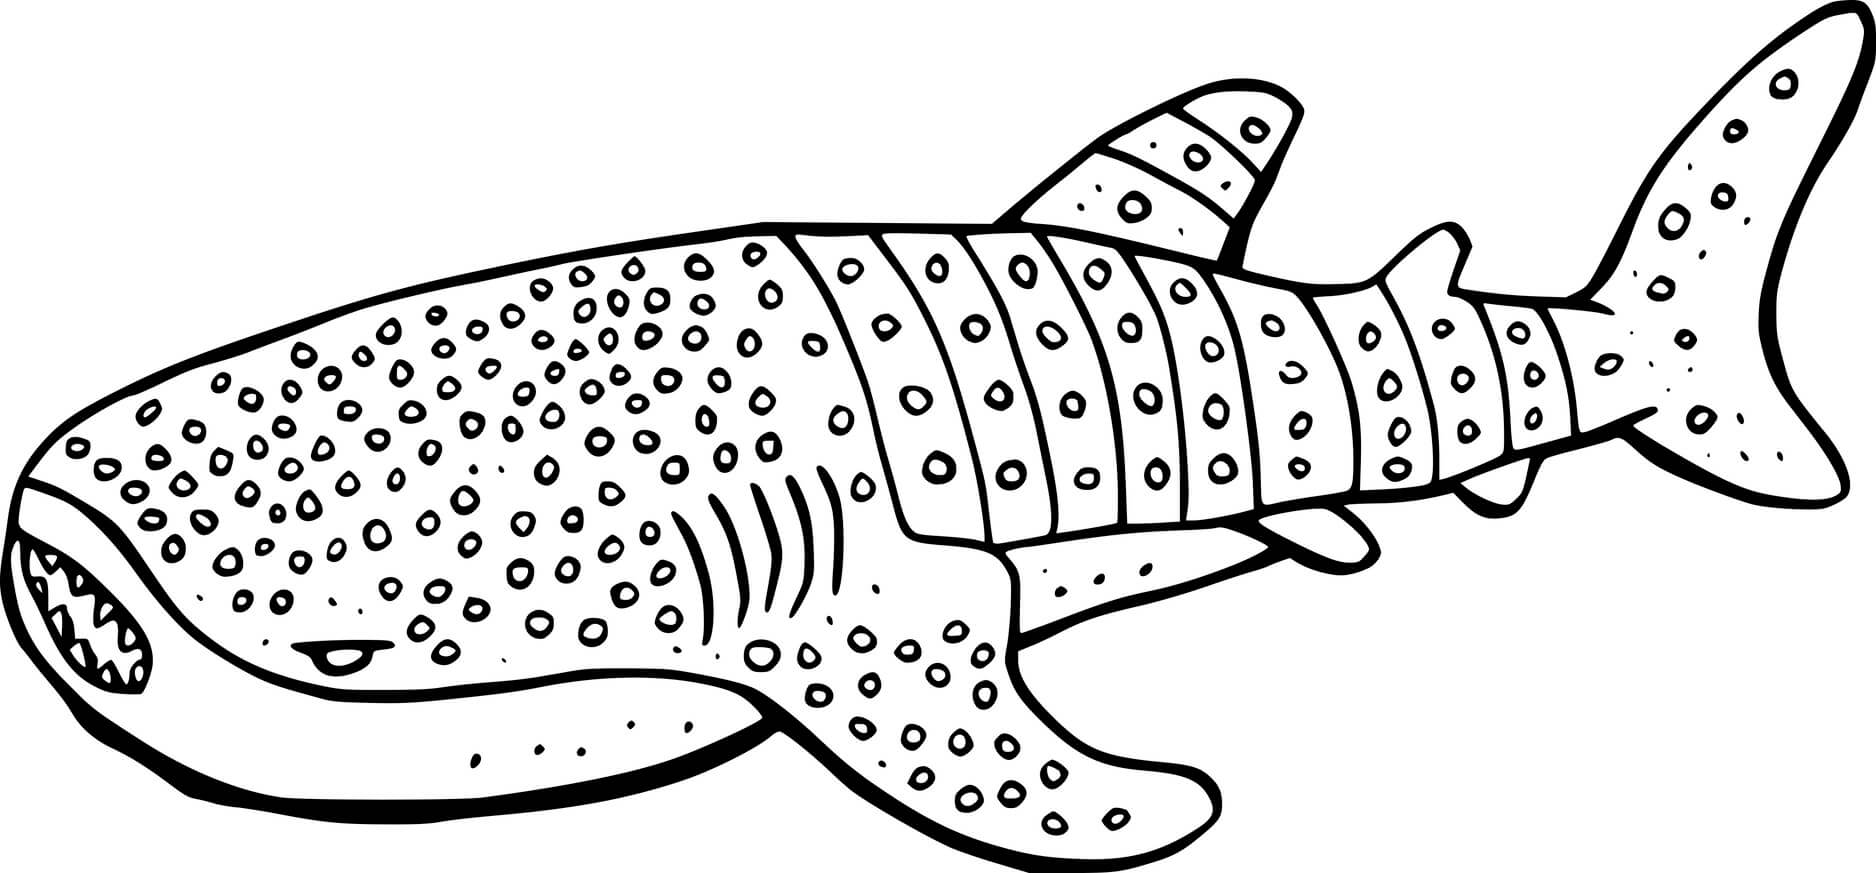 Cartoon Whale Shark Coloring Page